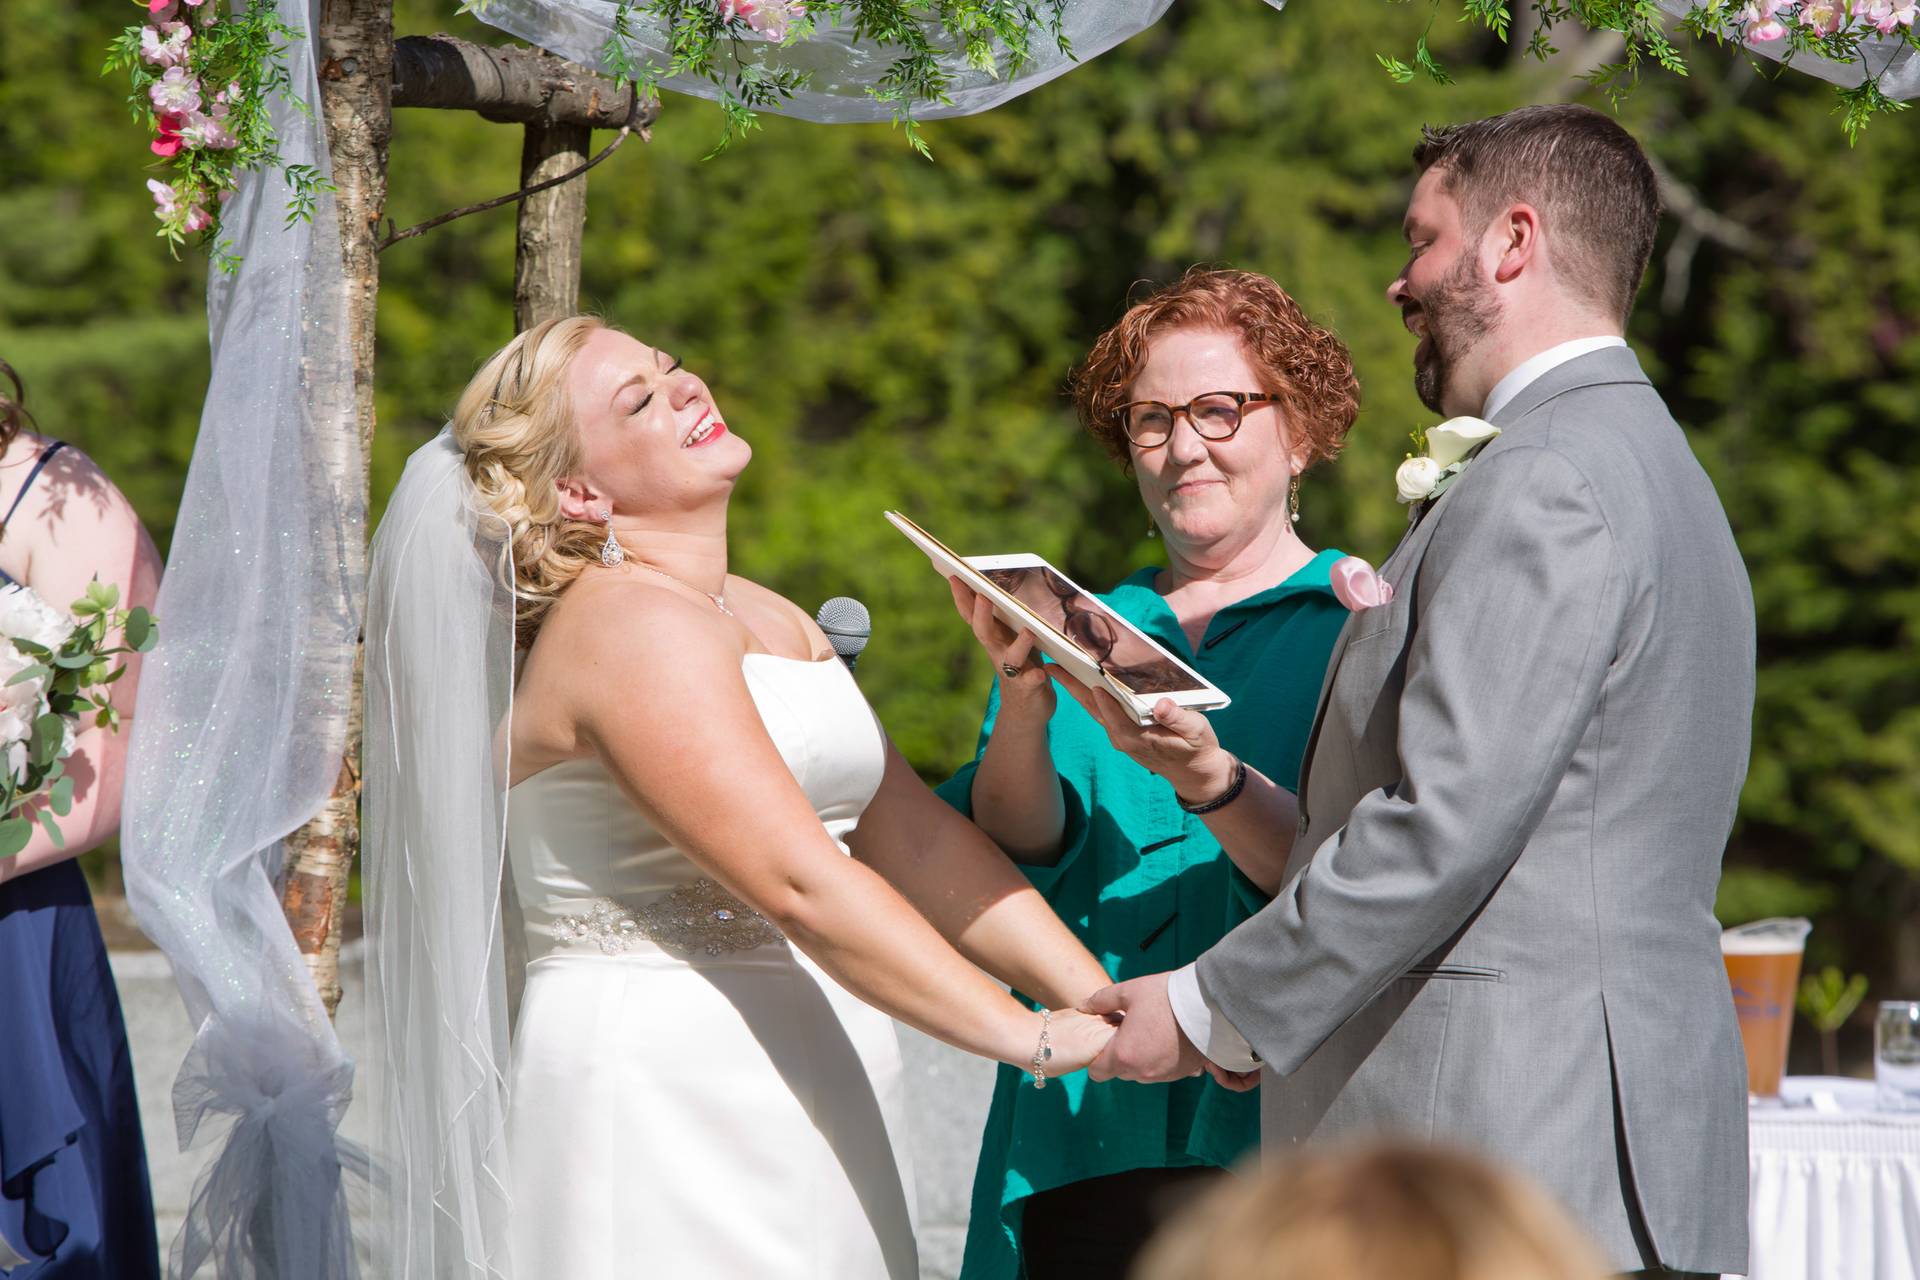 Wedding Officiants in Laconia, NH